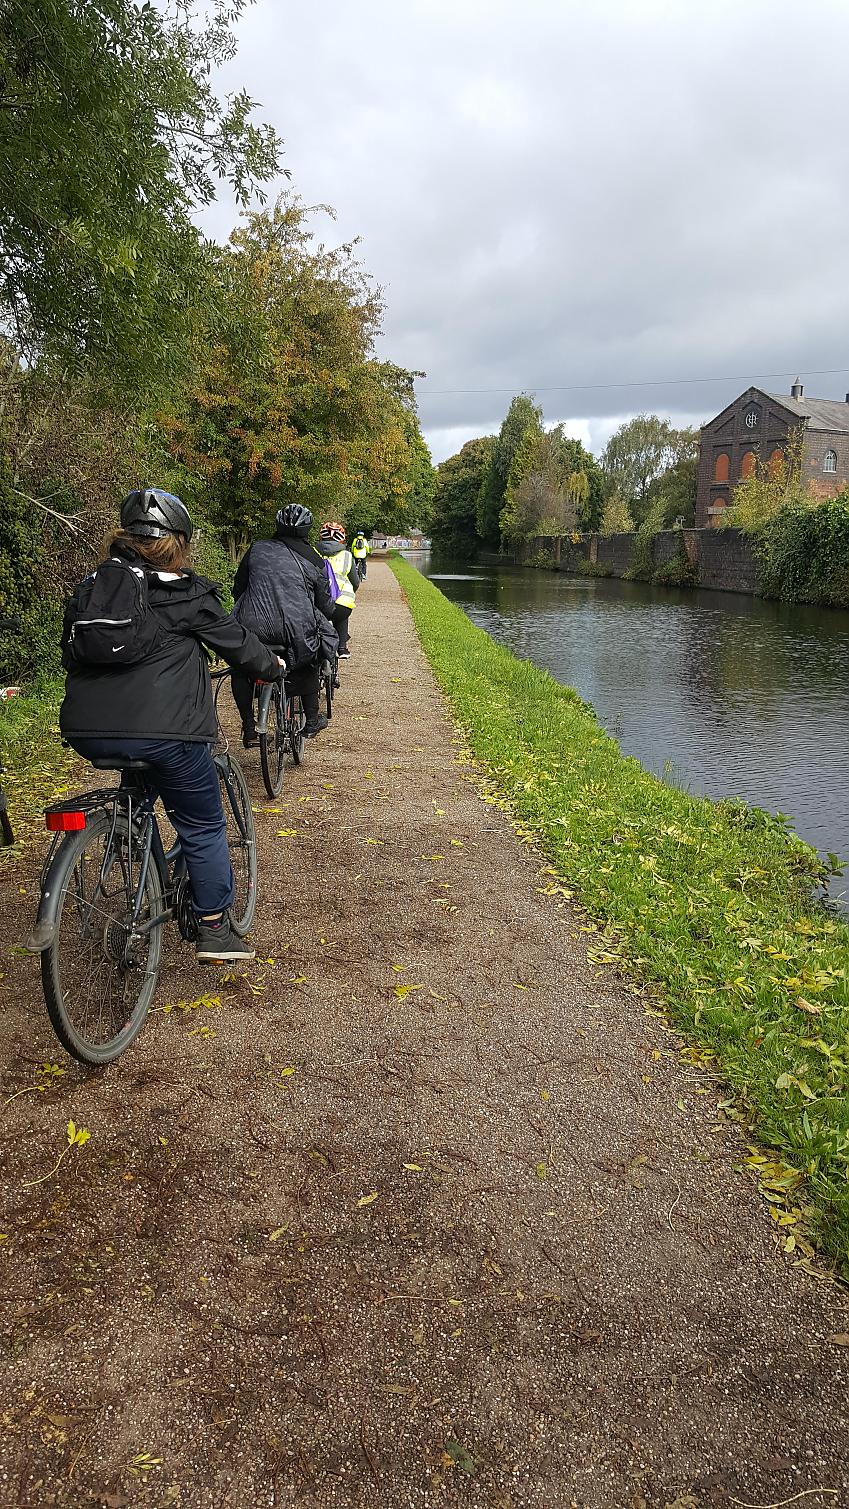 A group of people are cycling alongside a canal in single file. There are four of them. They wearing normal clothes, although two have hi-viz jackets. They all have helmets. It's autumn and the leaves are turning.